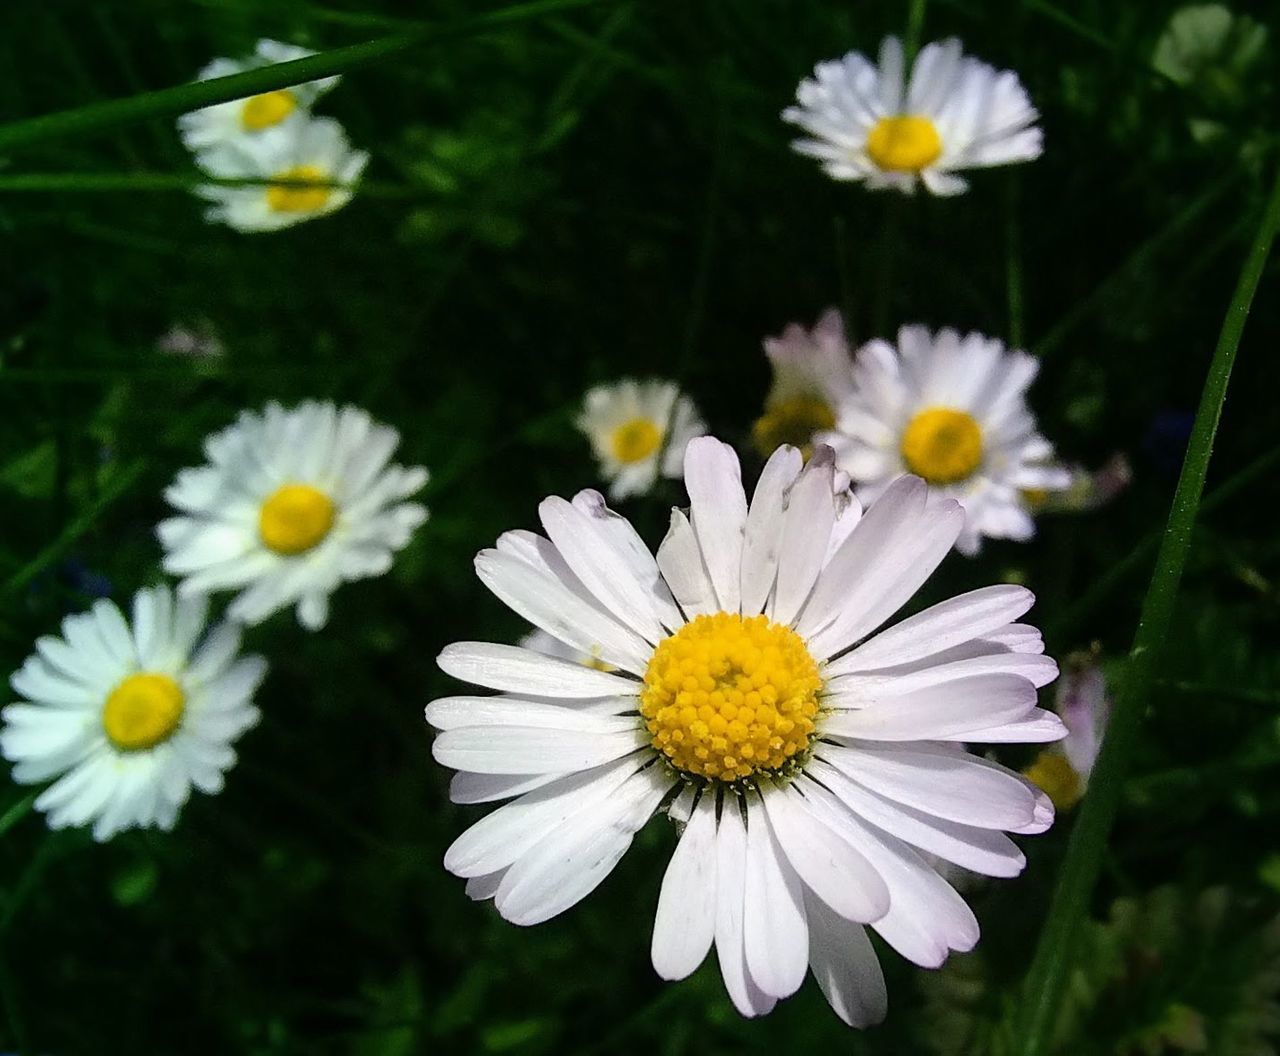 flower, flowering plant, plant, freshness, beauty in nature, daisy, flower head, fragility, petal, close-up, growth, inflorescence, nature, white, pollen, yellow, no people, botany, focus on foreground, tanacetum parthenium, meadow, outdoors, herb, springtime, summer, day, animal wildlife, blossom, garden cosmos, macro photography, wildflower